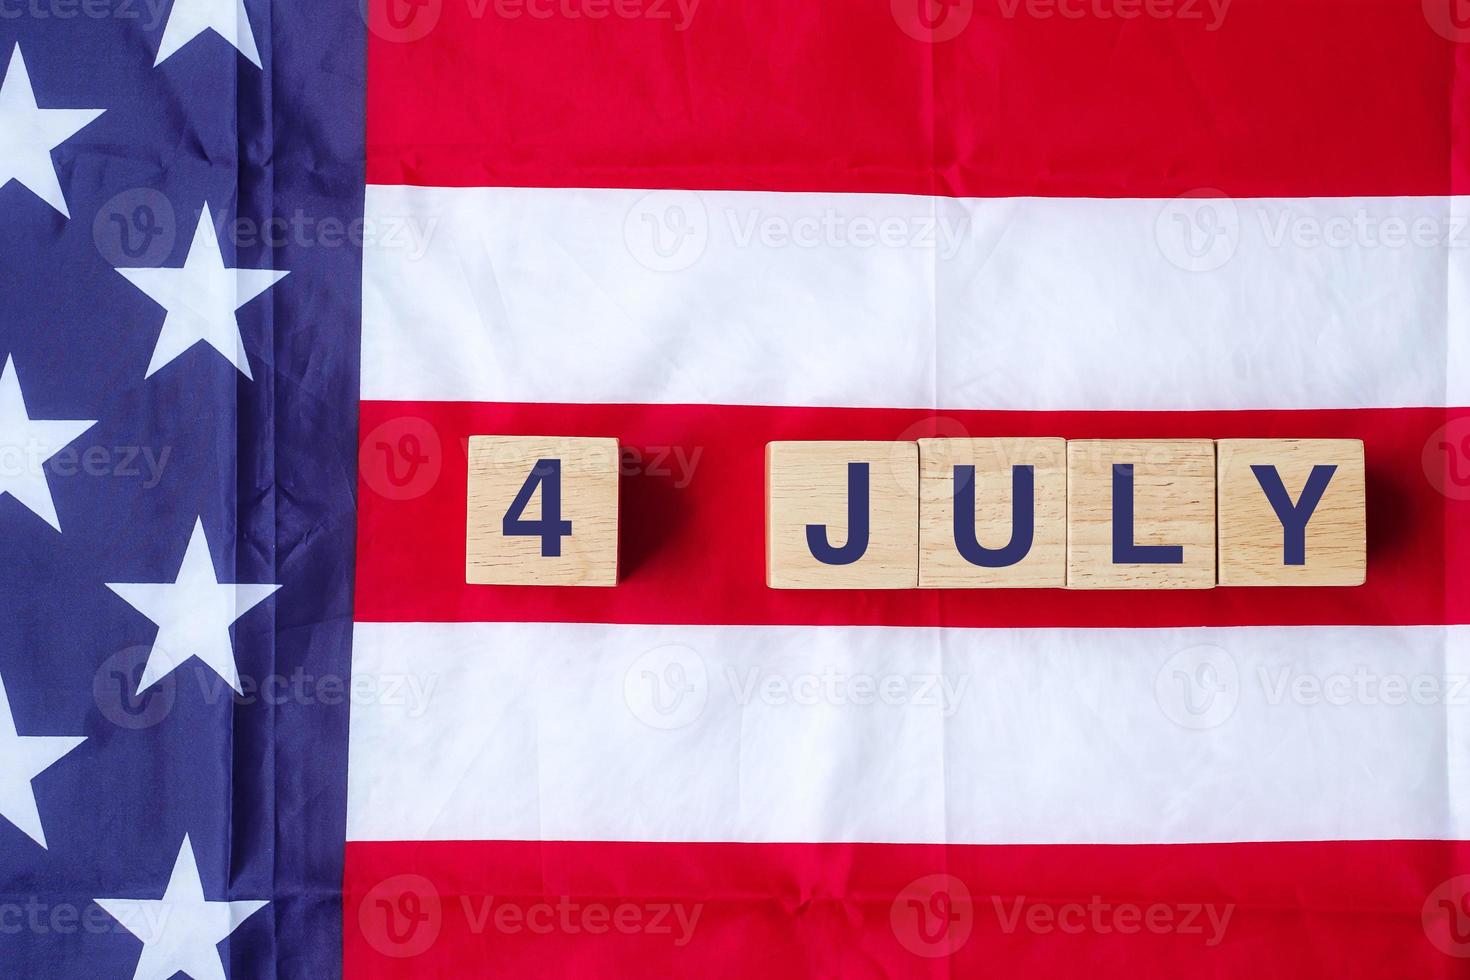 Fourth of July text on United States of America flag background. USA holiday of Independence and celebration concepts photo